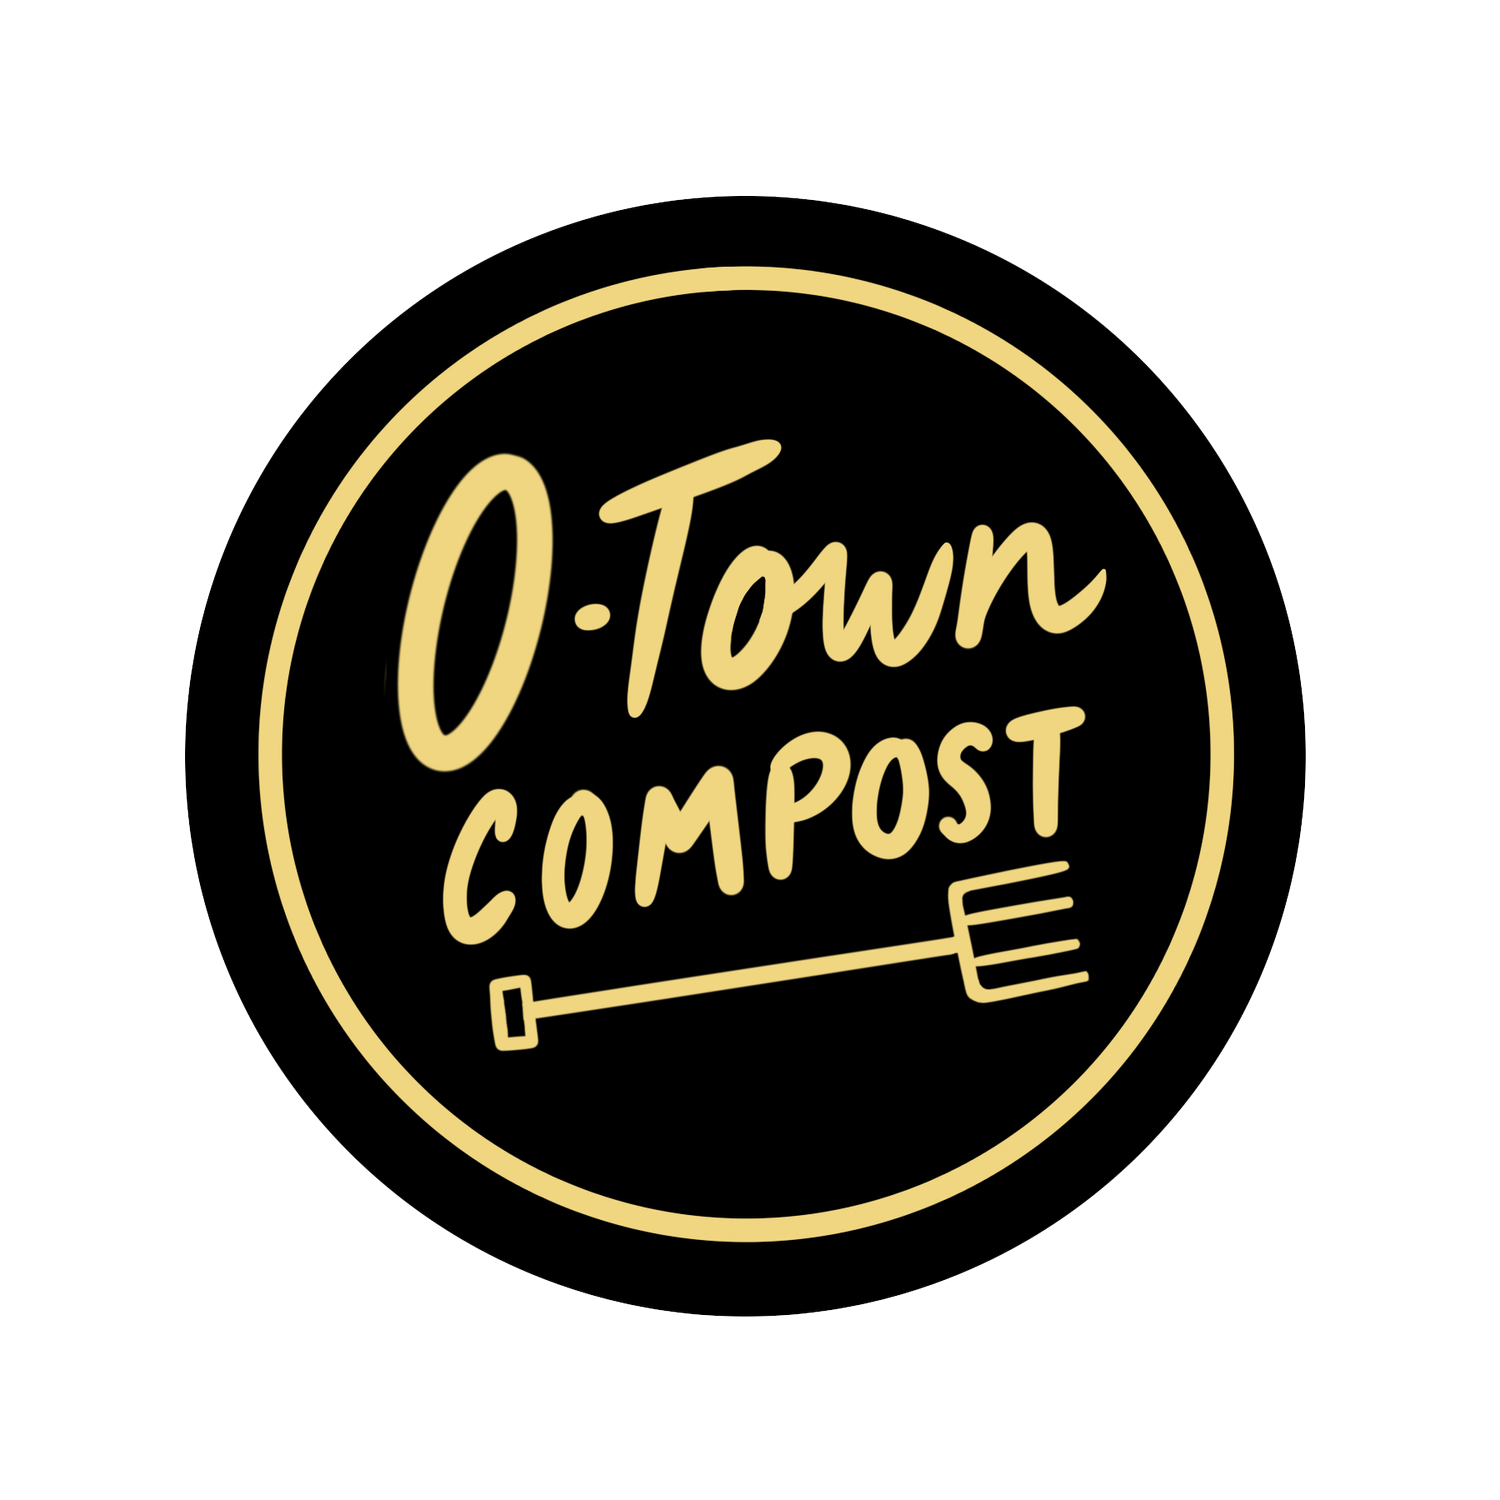 O-Town Compost